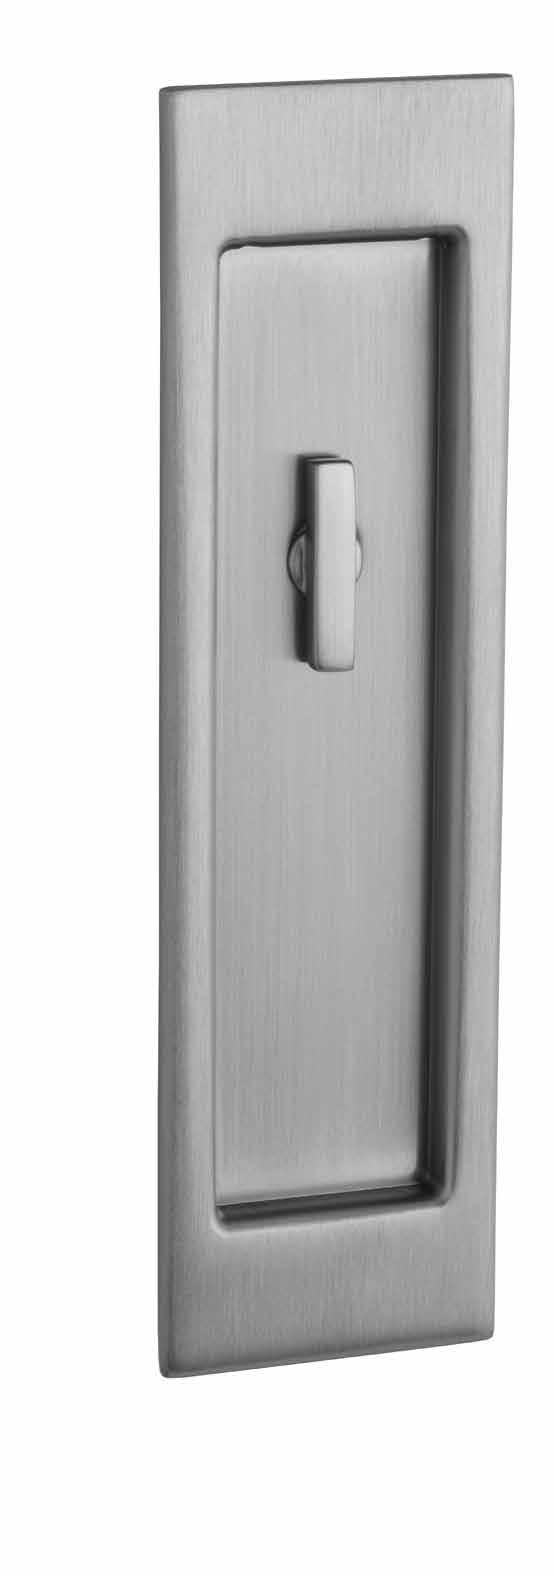 MISCELLANEOUS SLIDING DOOR We offer the BEST delivered prices on this NEW pocket door hardware of any dealer, big